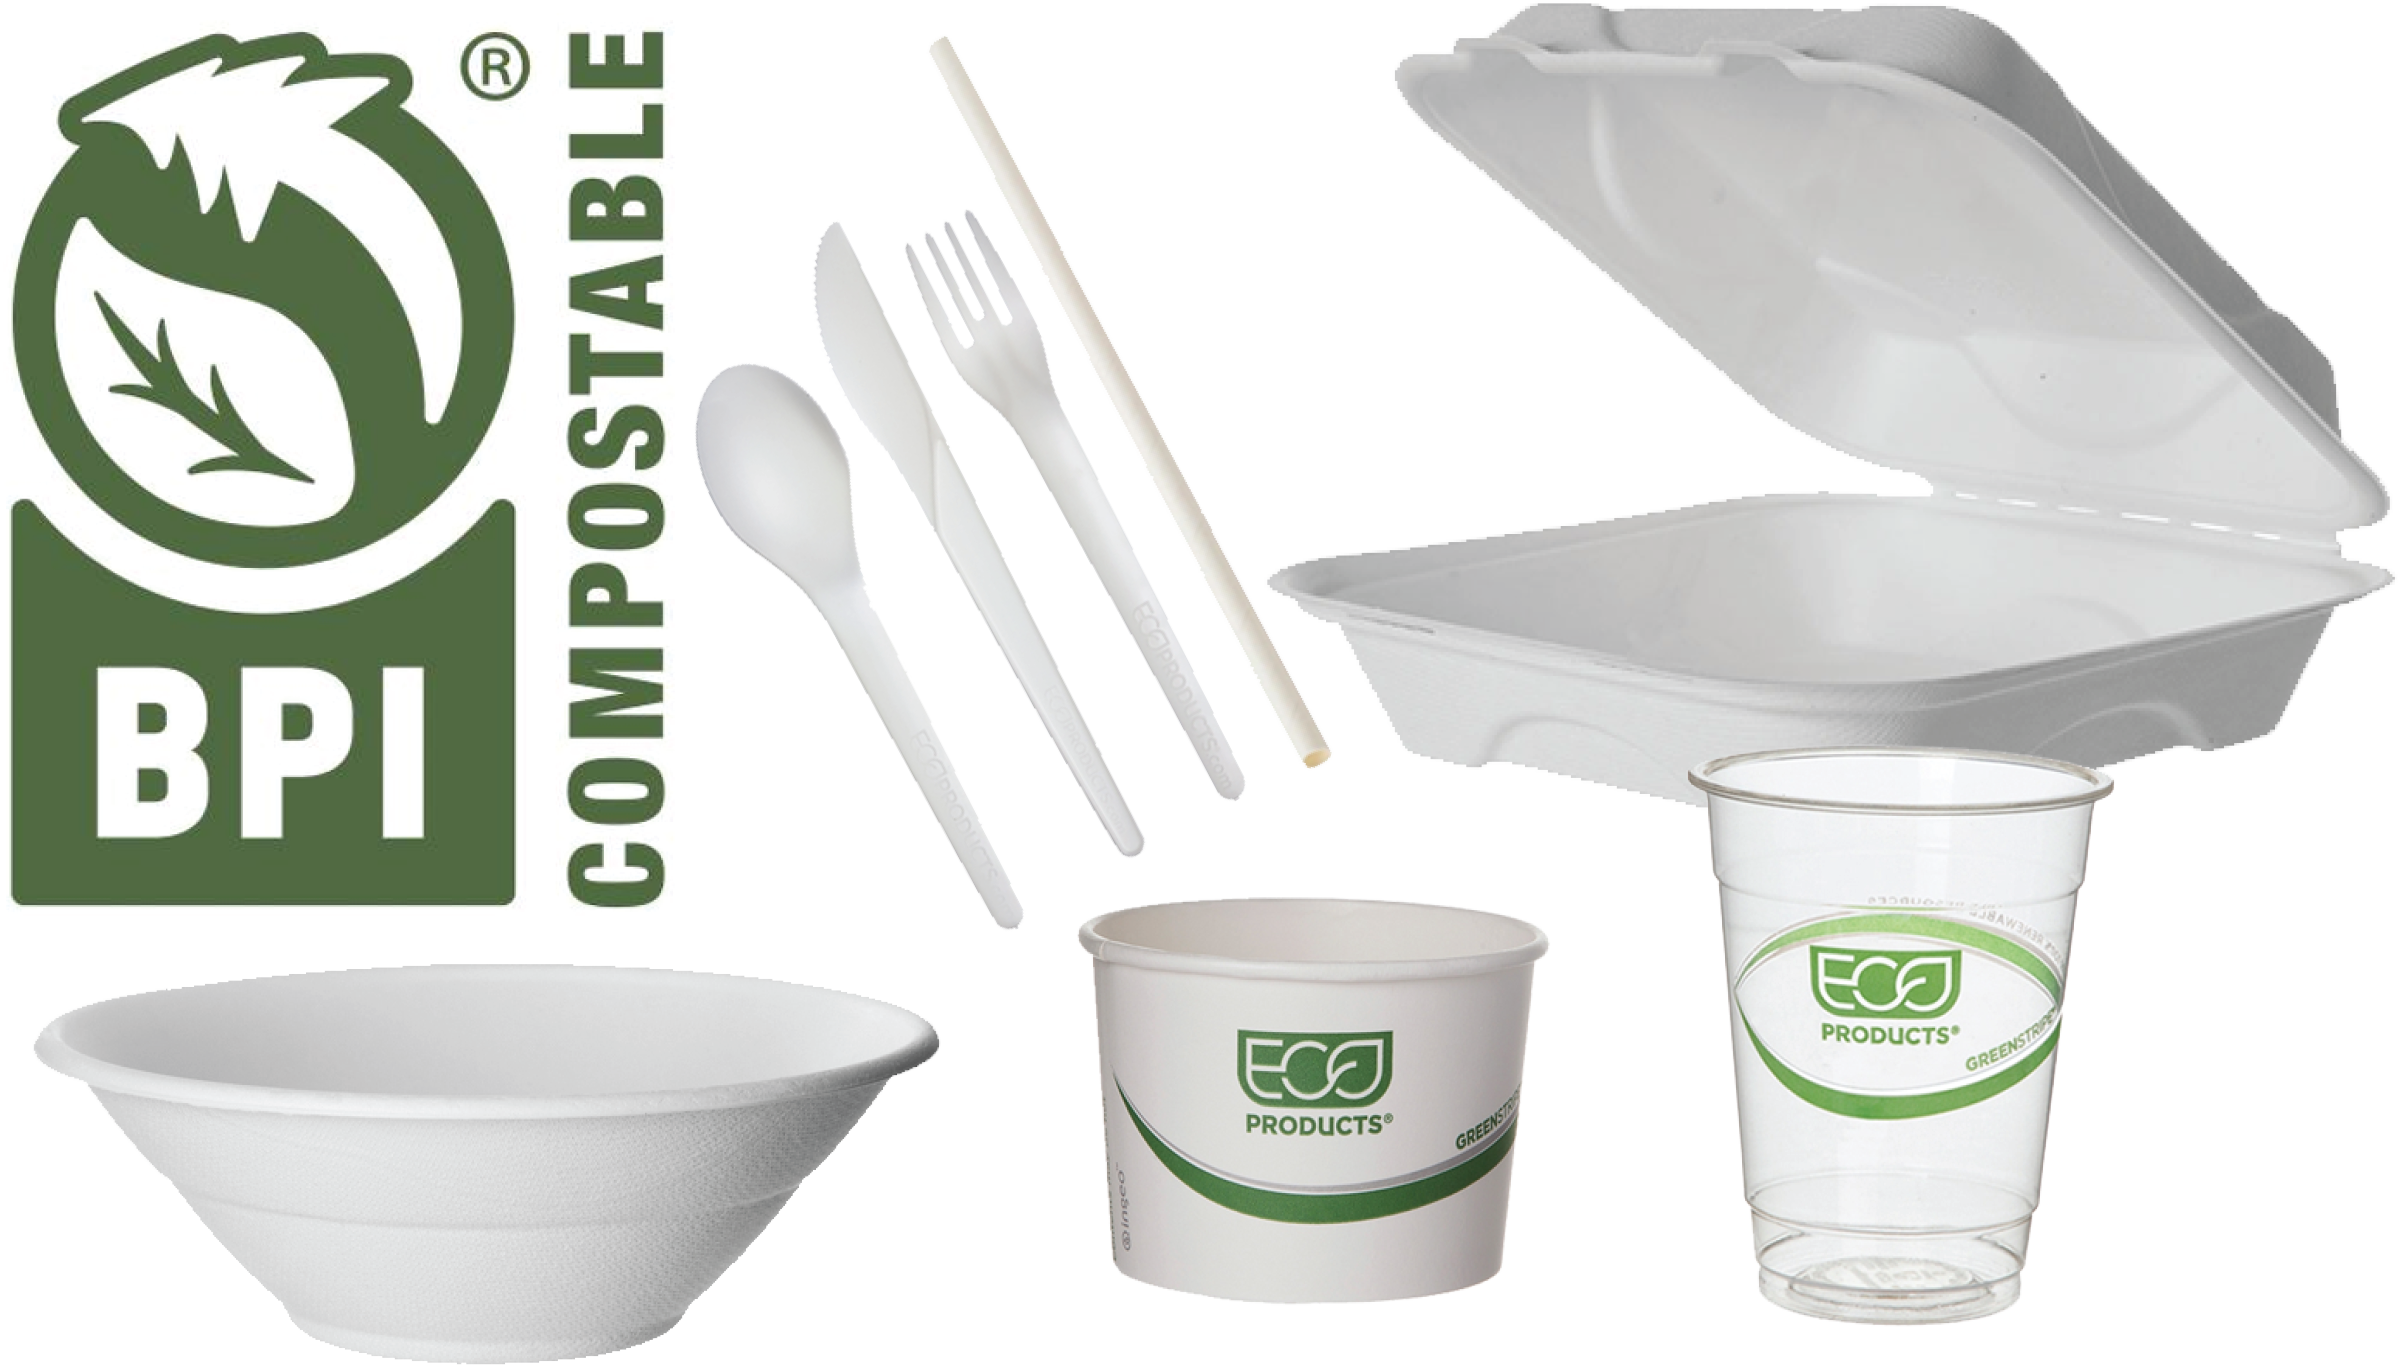 BPI compostable bowls, silverware, cups and food container.